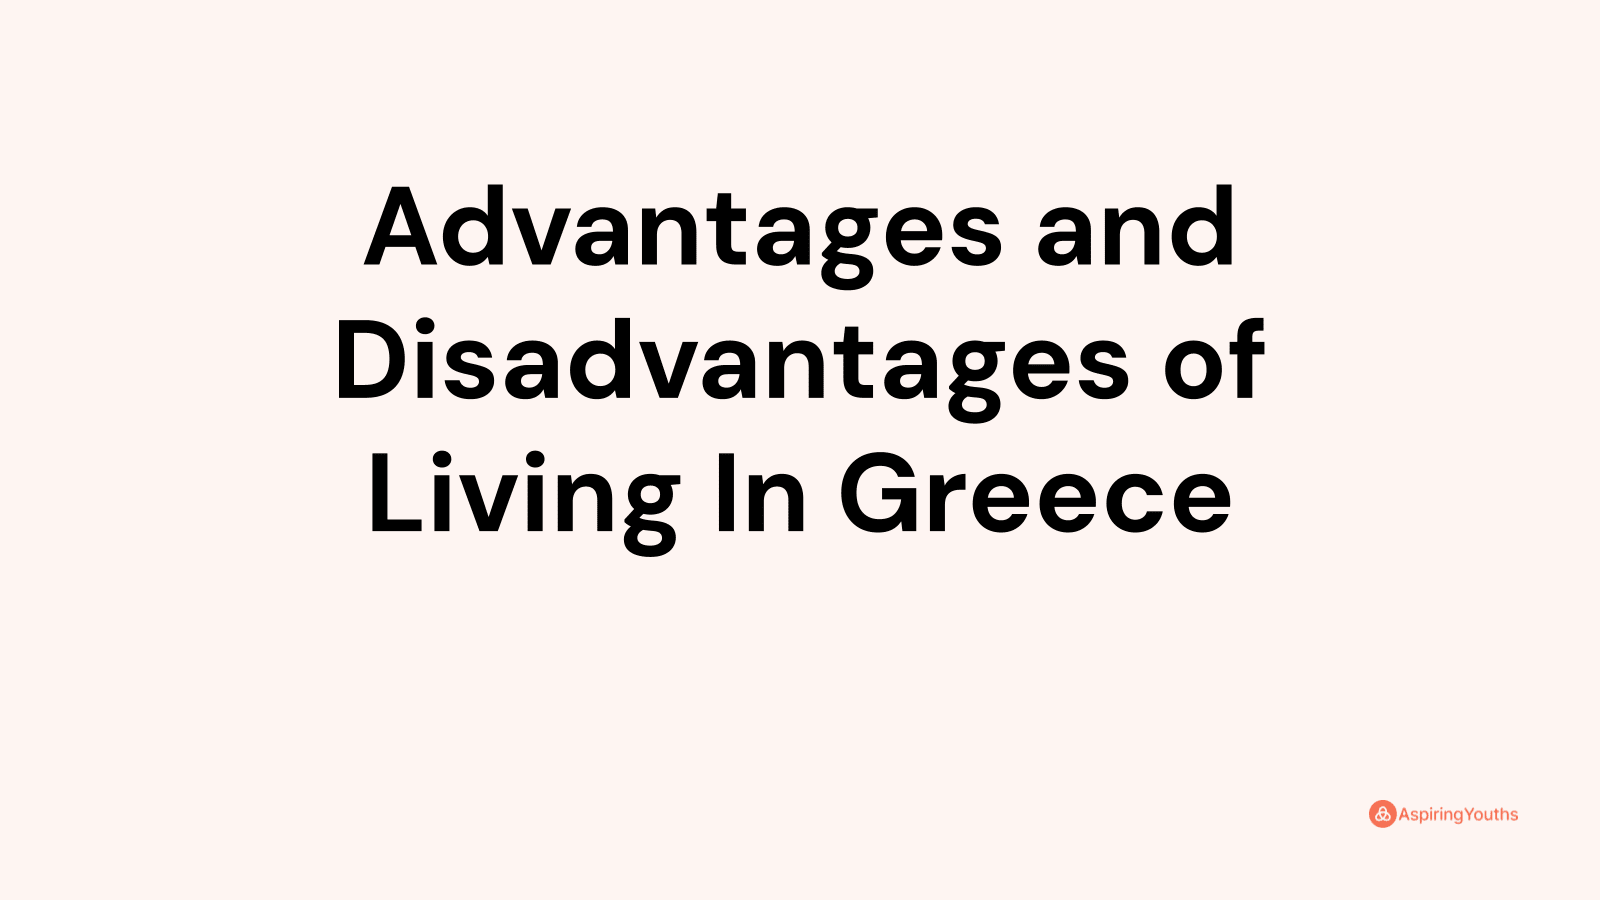 Advantages and disadvantages of Living In Greece